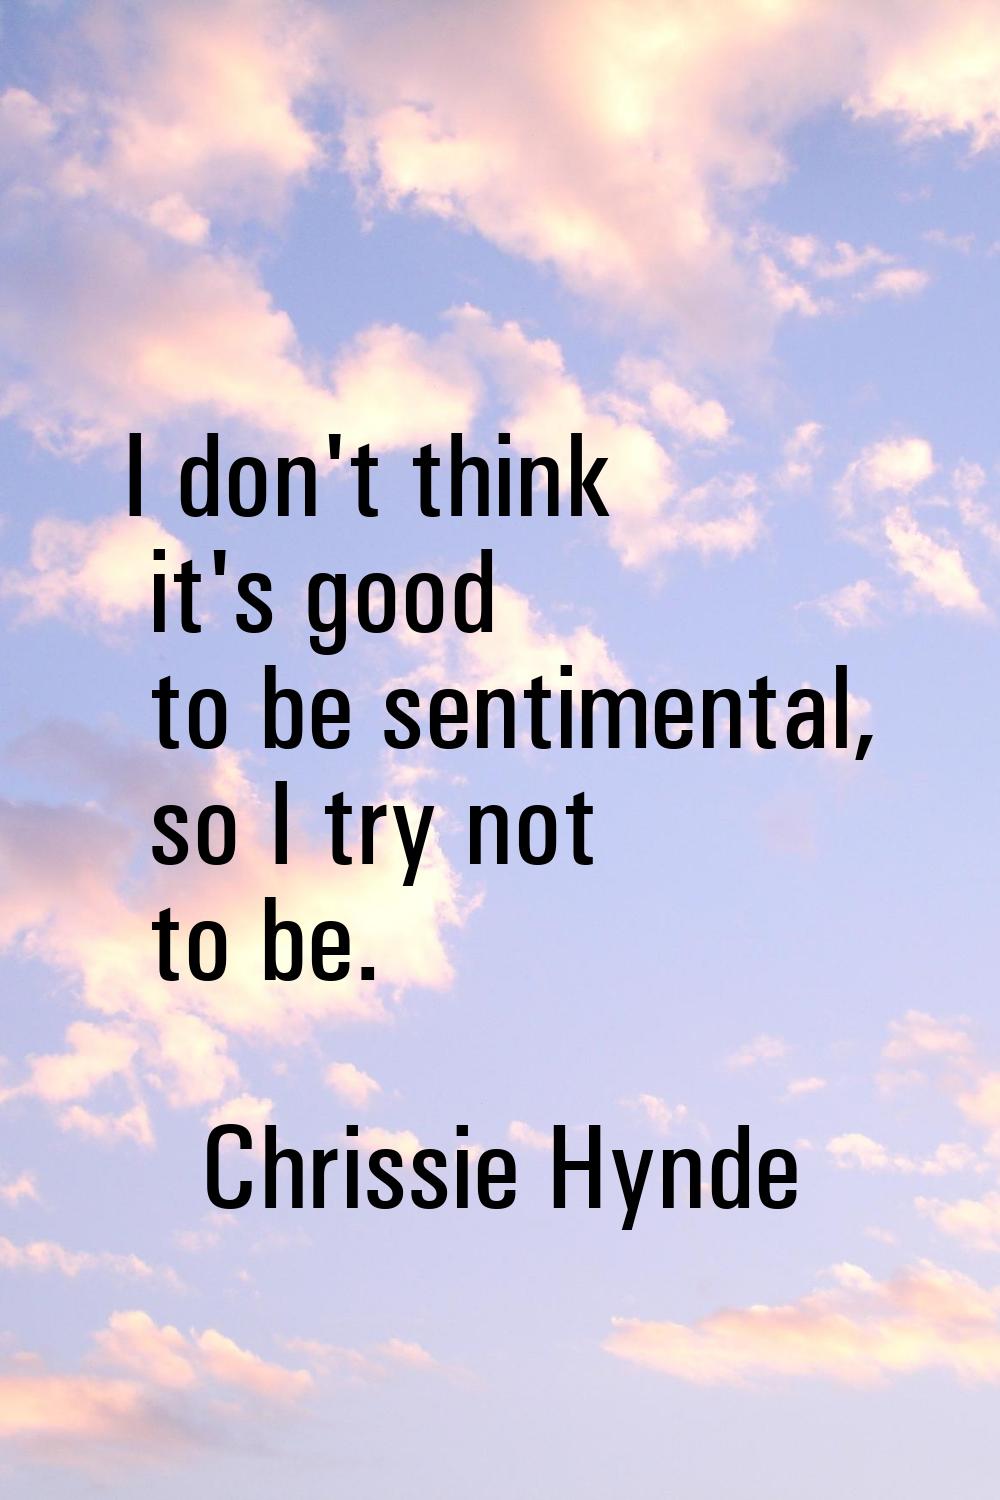 I don't think it's good to be sentimental, so I try not to be.